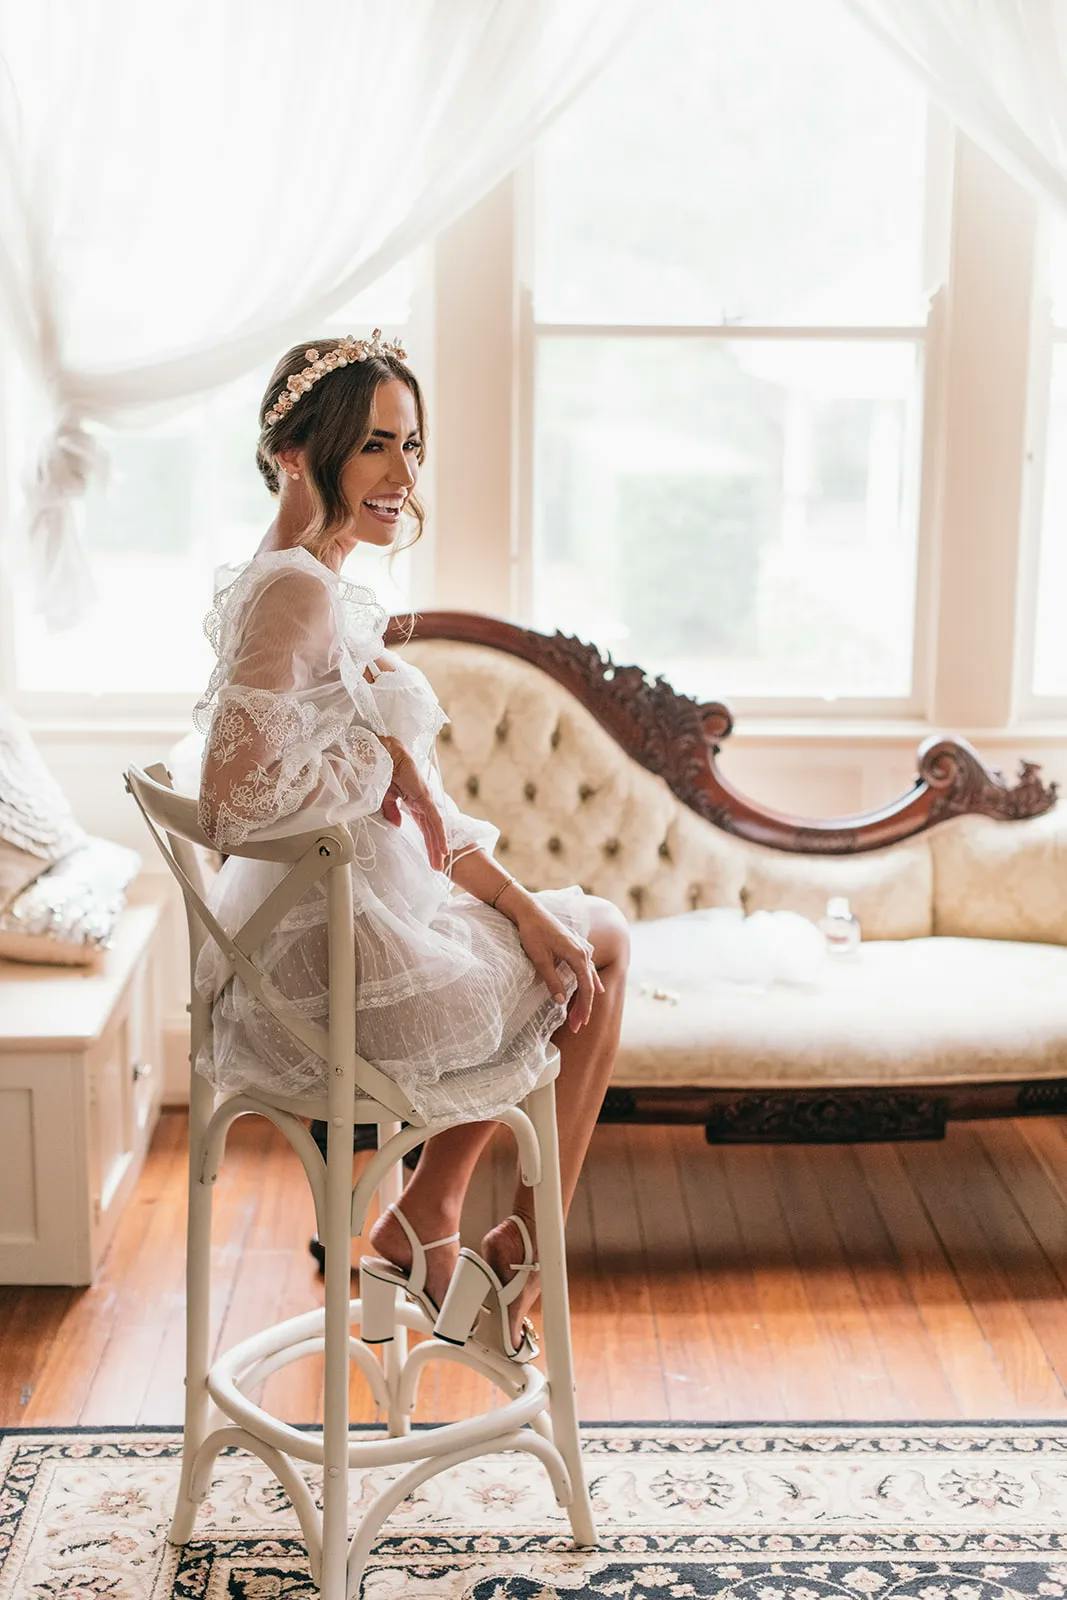 A woman in a white, lacy dress and a delicate floral headband sits on a wooden chair near a vintage sofa in a sunlit room. She smiles brightly, and the room has wooden floors and large windows draped with sheer curtains.